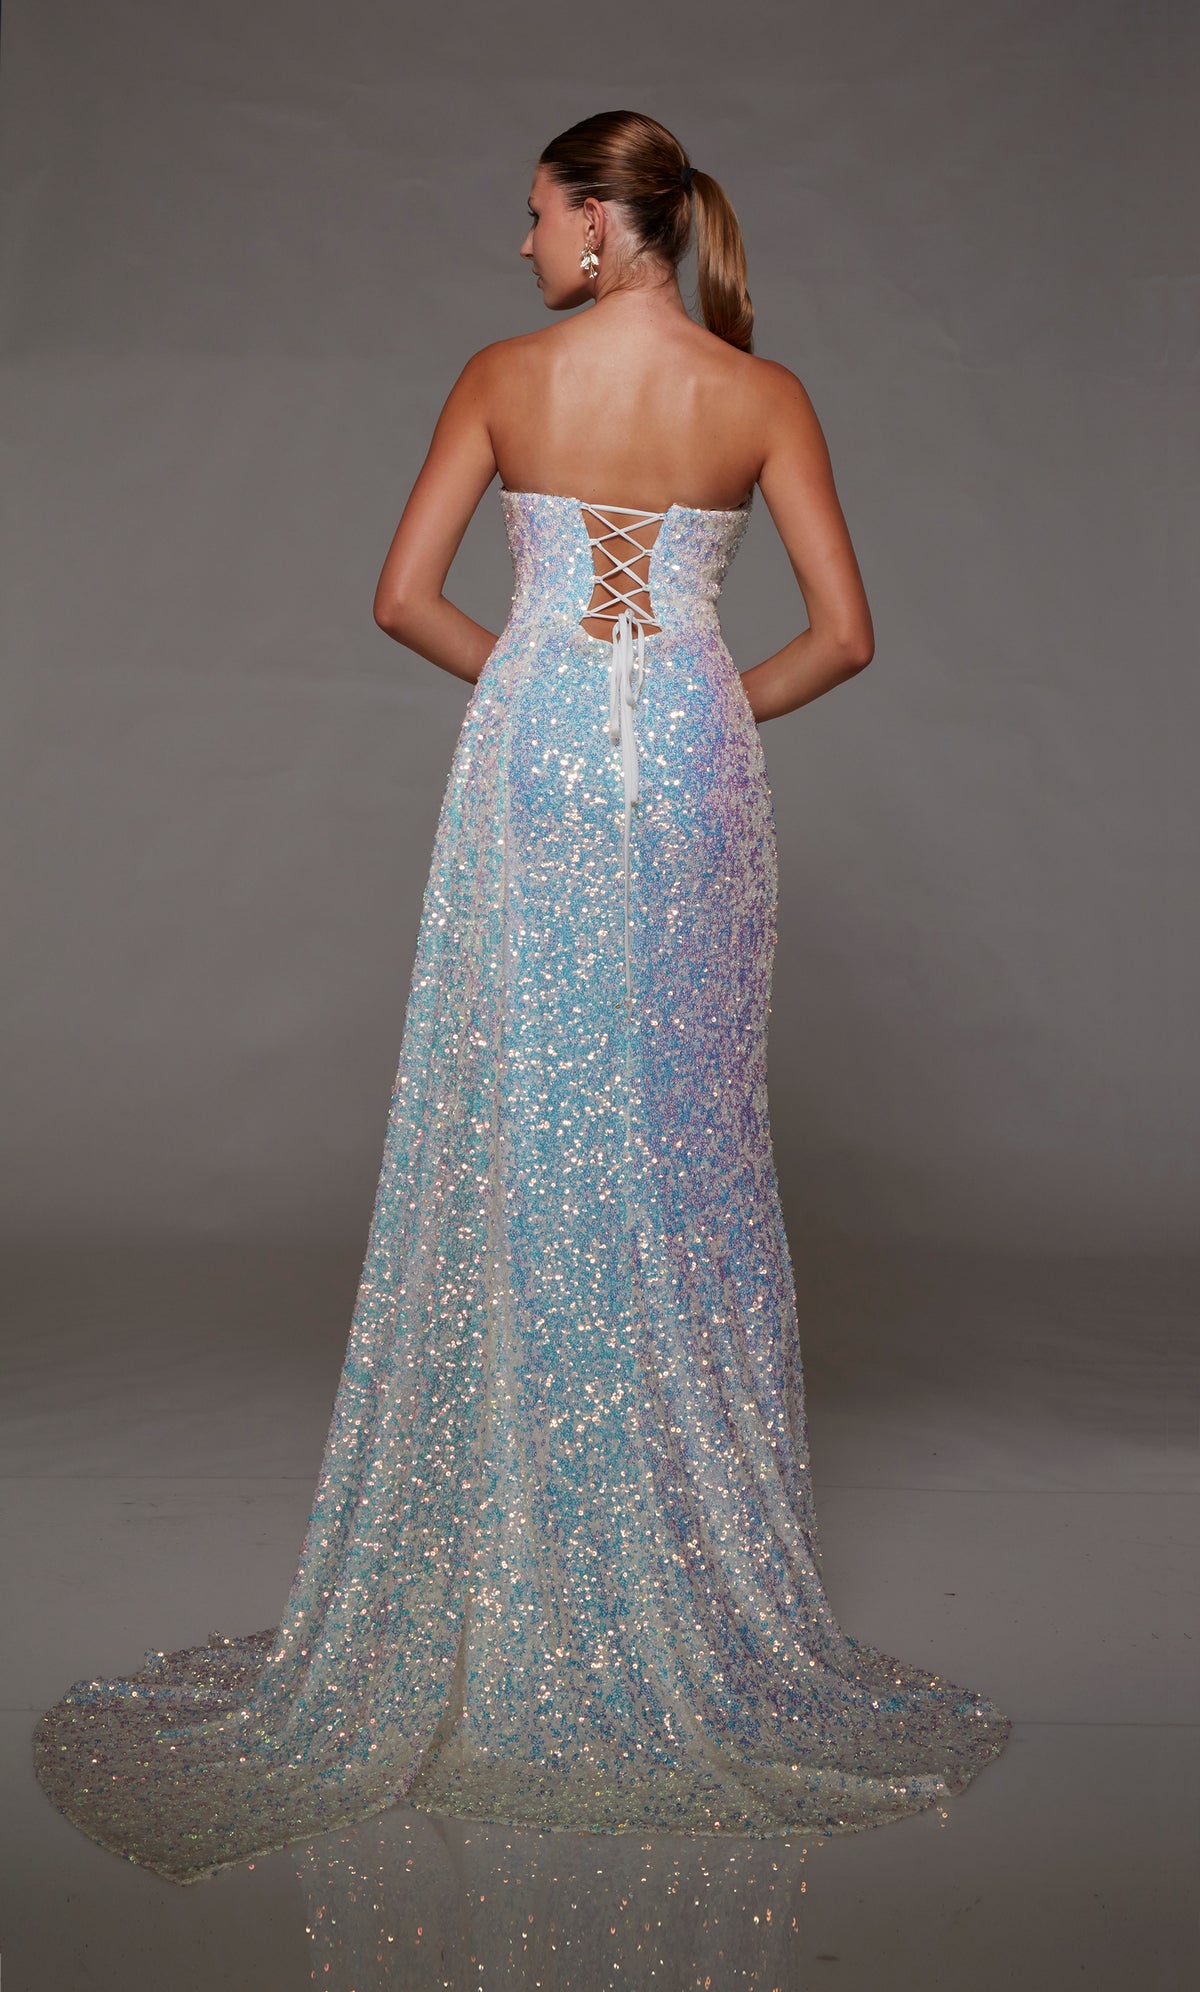 Ivory iridescent sequin gown with an strapless neckline, daring side slit, lace-up back, and side train for an dramatic and glamorous effect.